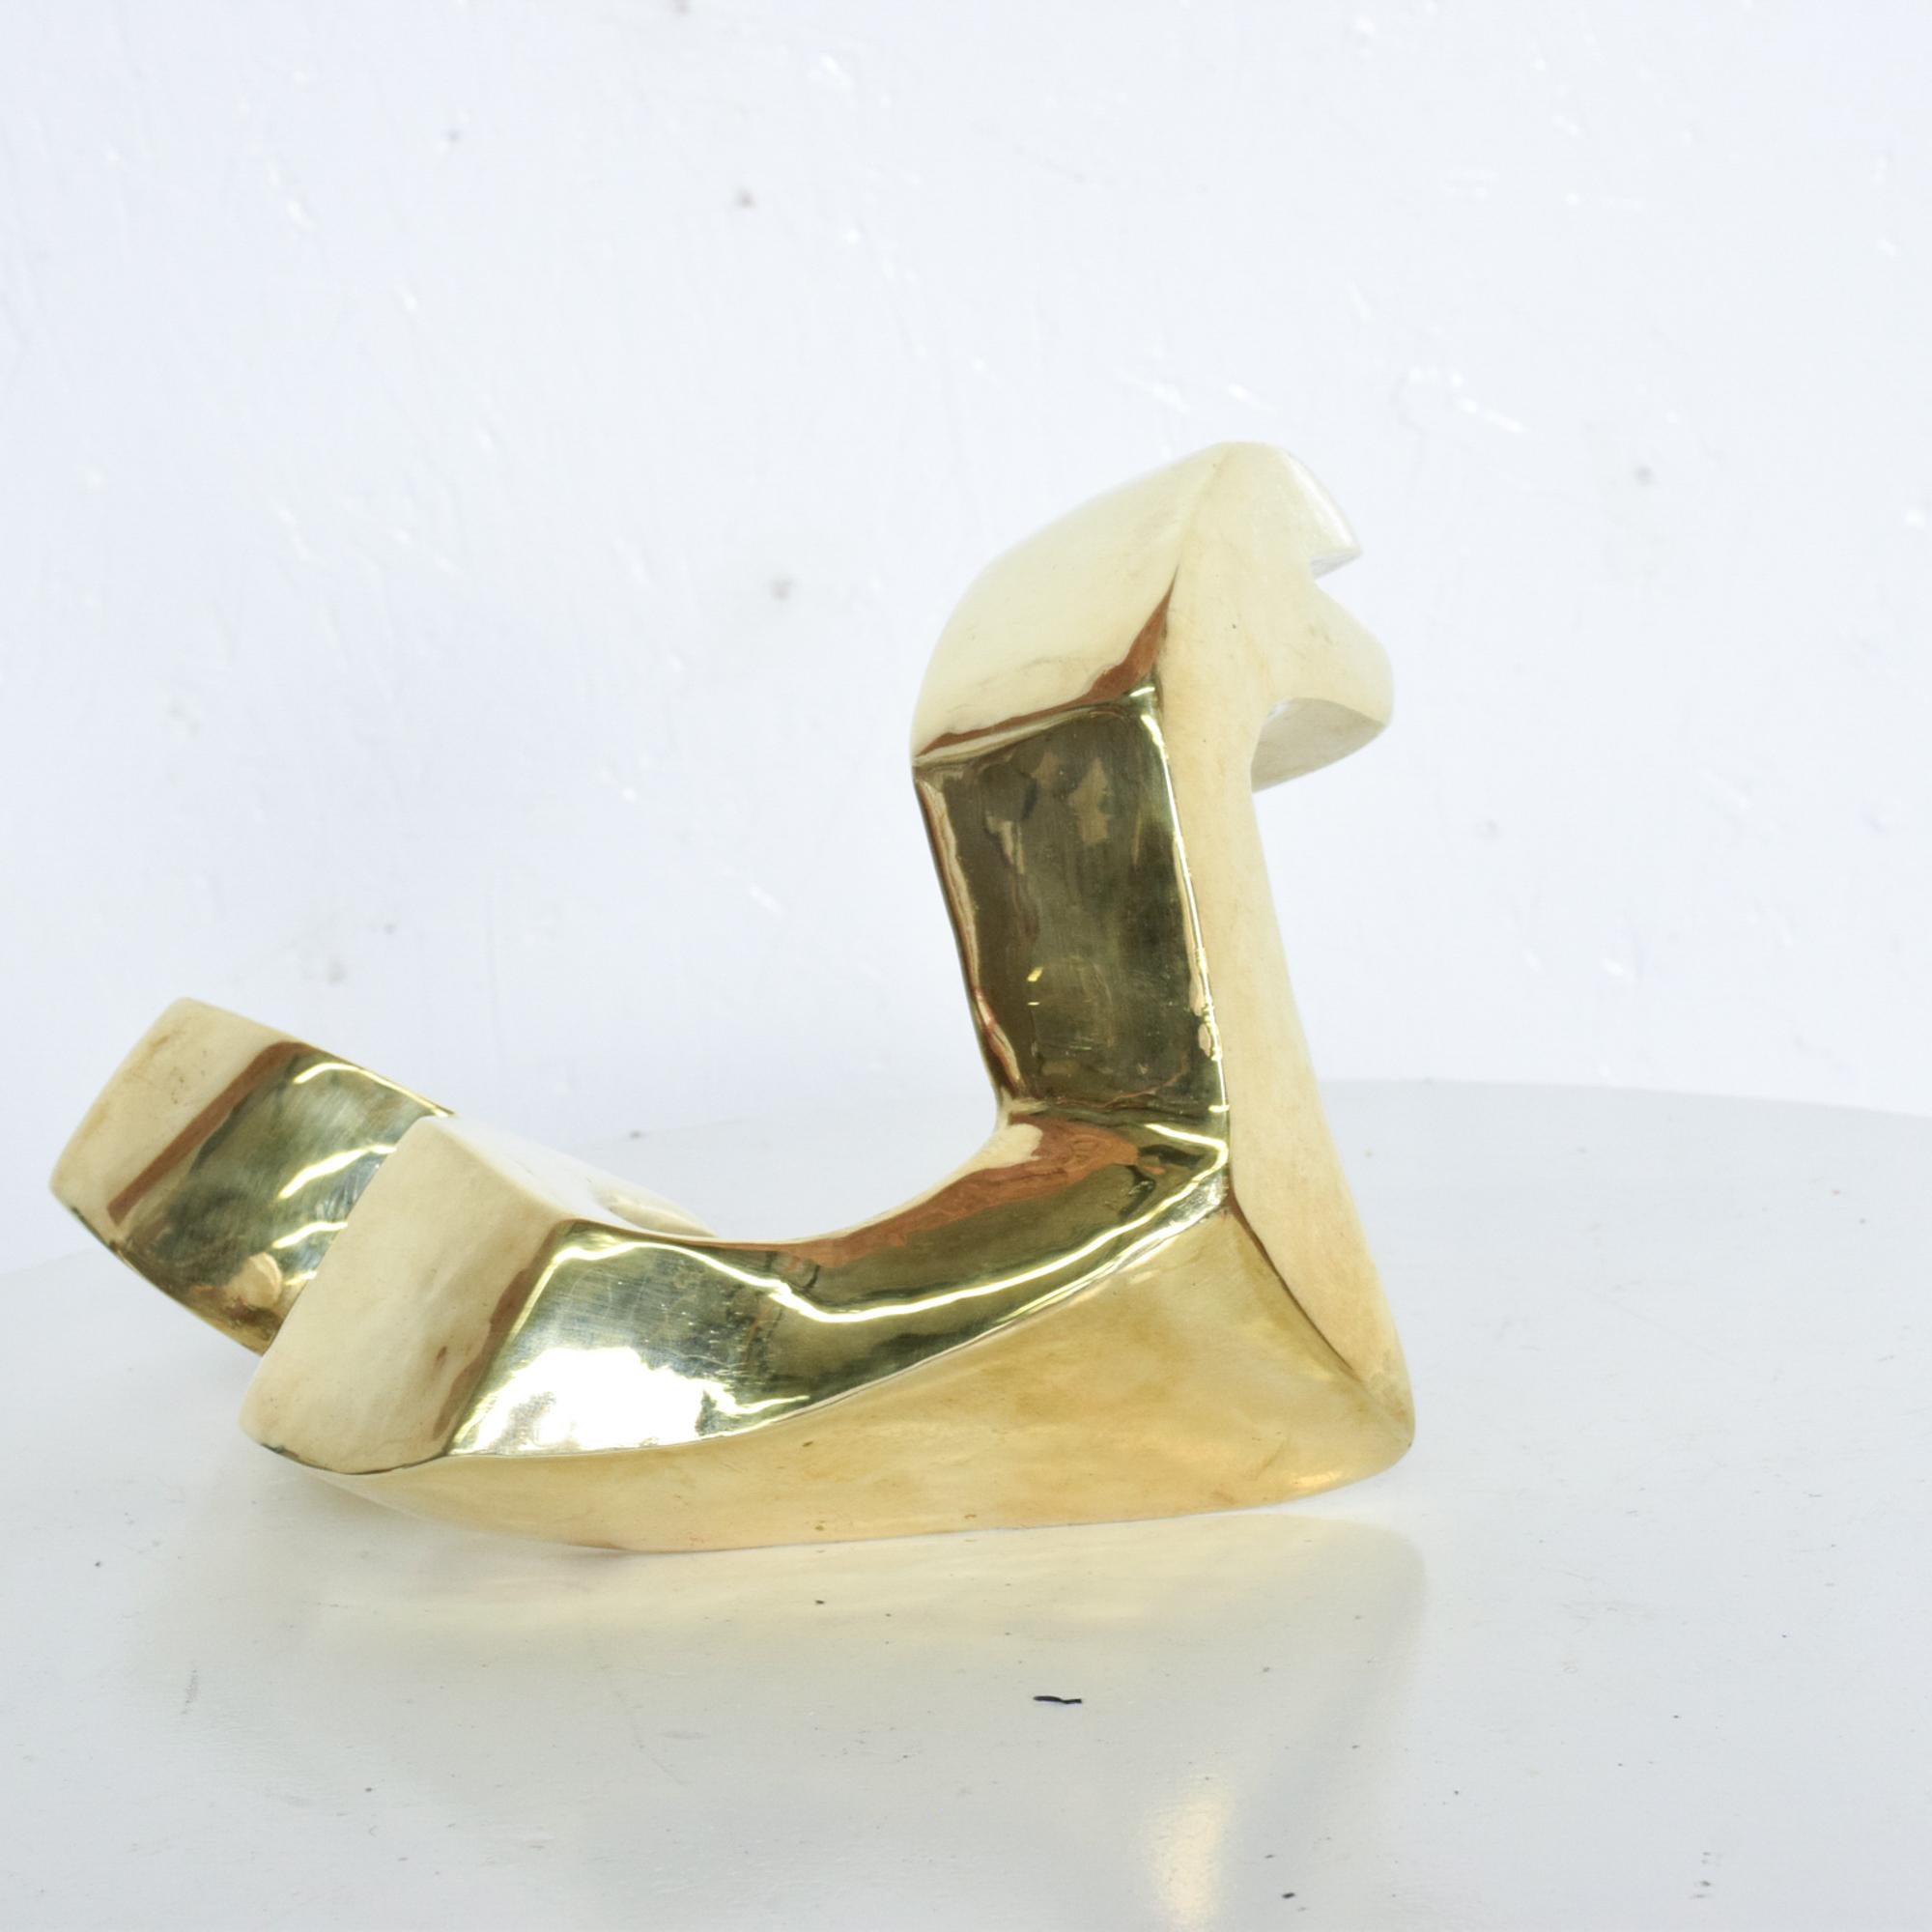 Polished 1970s Mathias Goeritz Abstract Bronze Serpent Sculpture Animal Pedregal Mexico For Sale